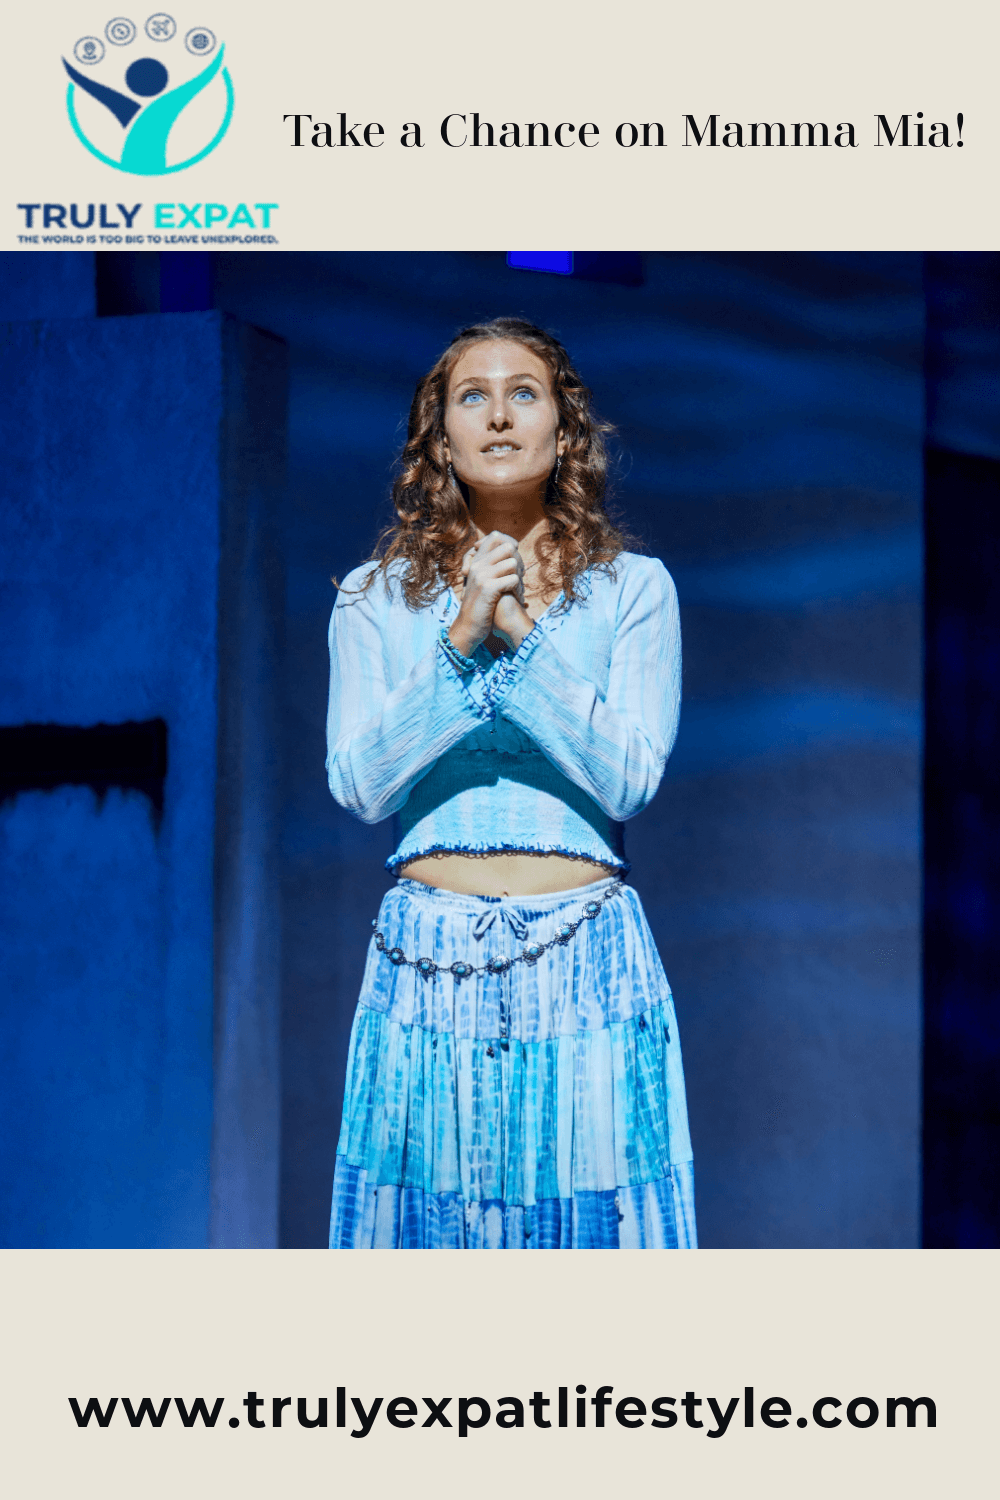 Mamma Mia! The Musical review